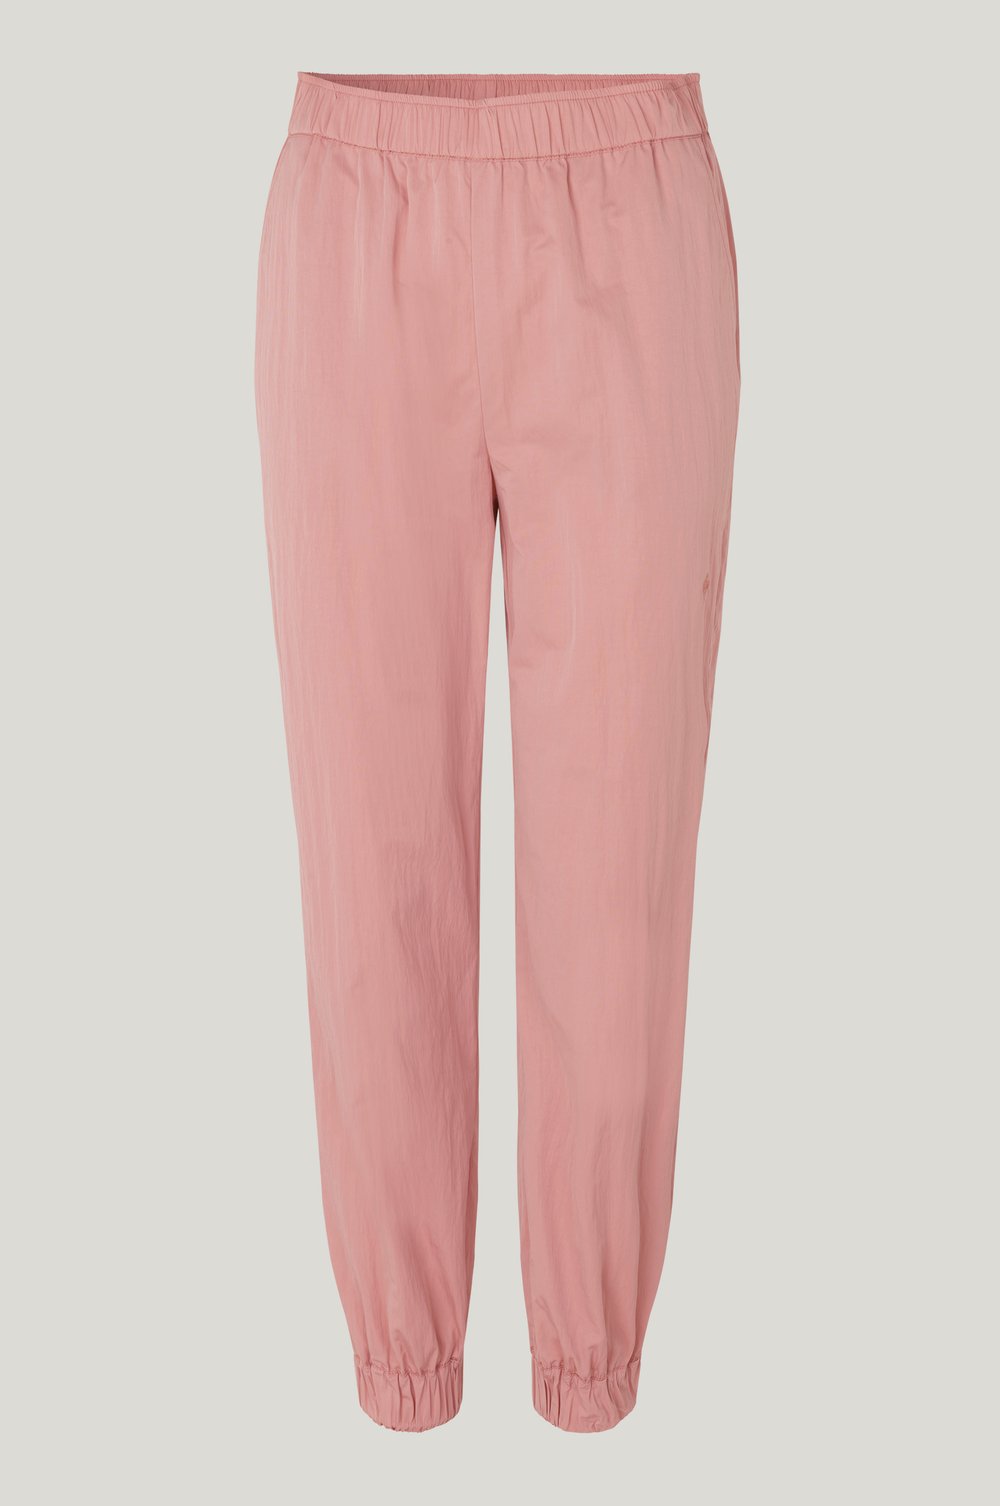 Just Female Wish Pants in Misty Rose